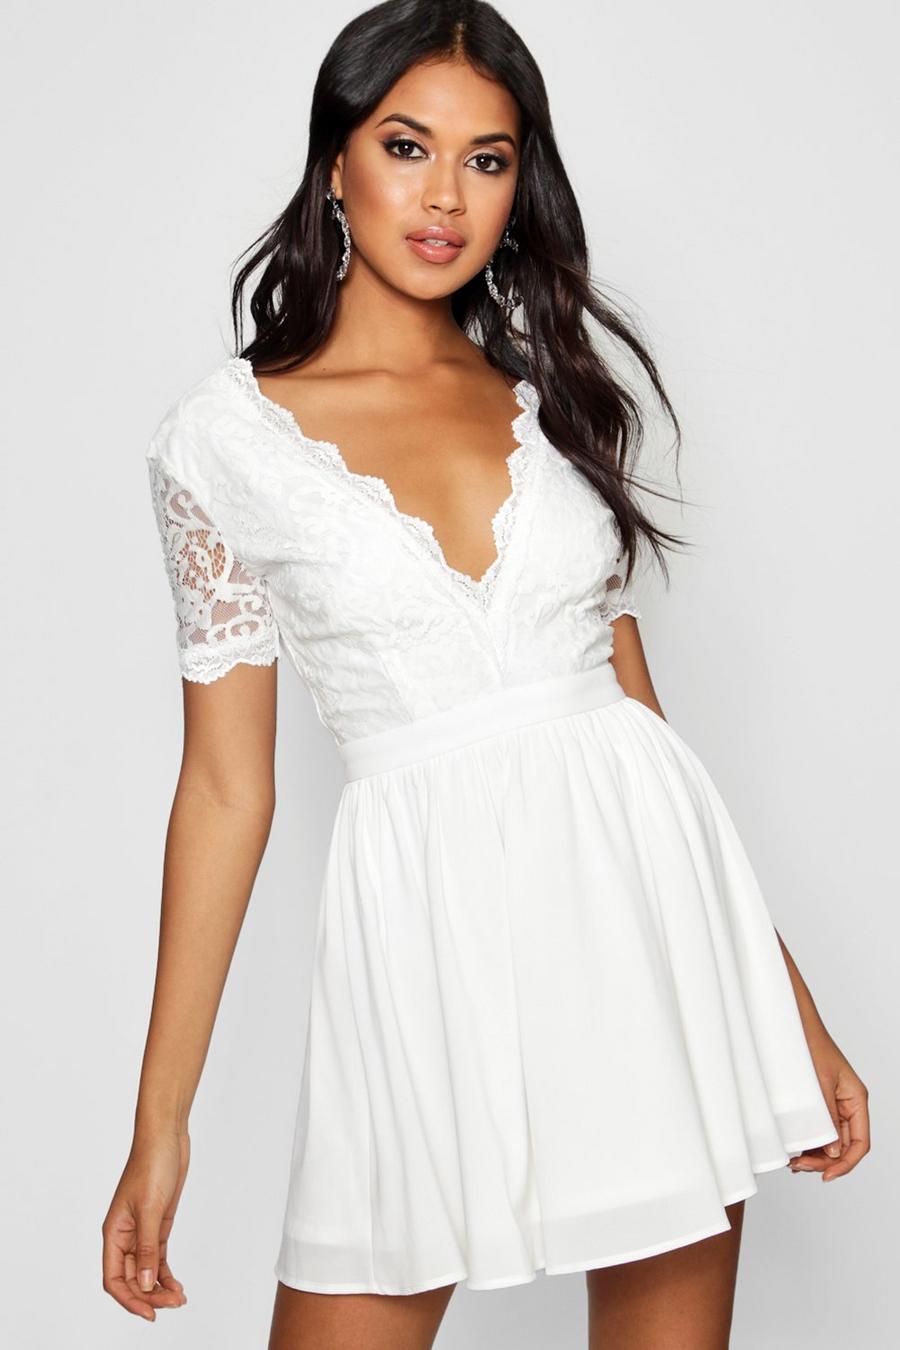 Ivory white Lace Top Skater Dress